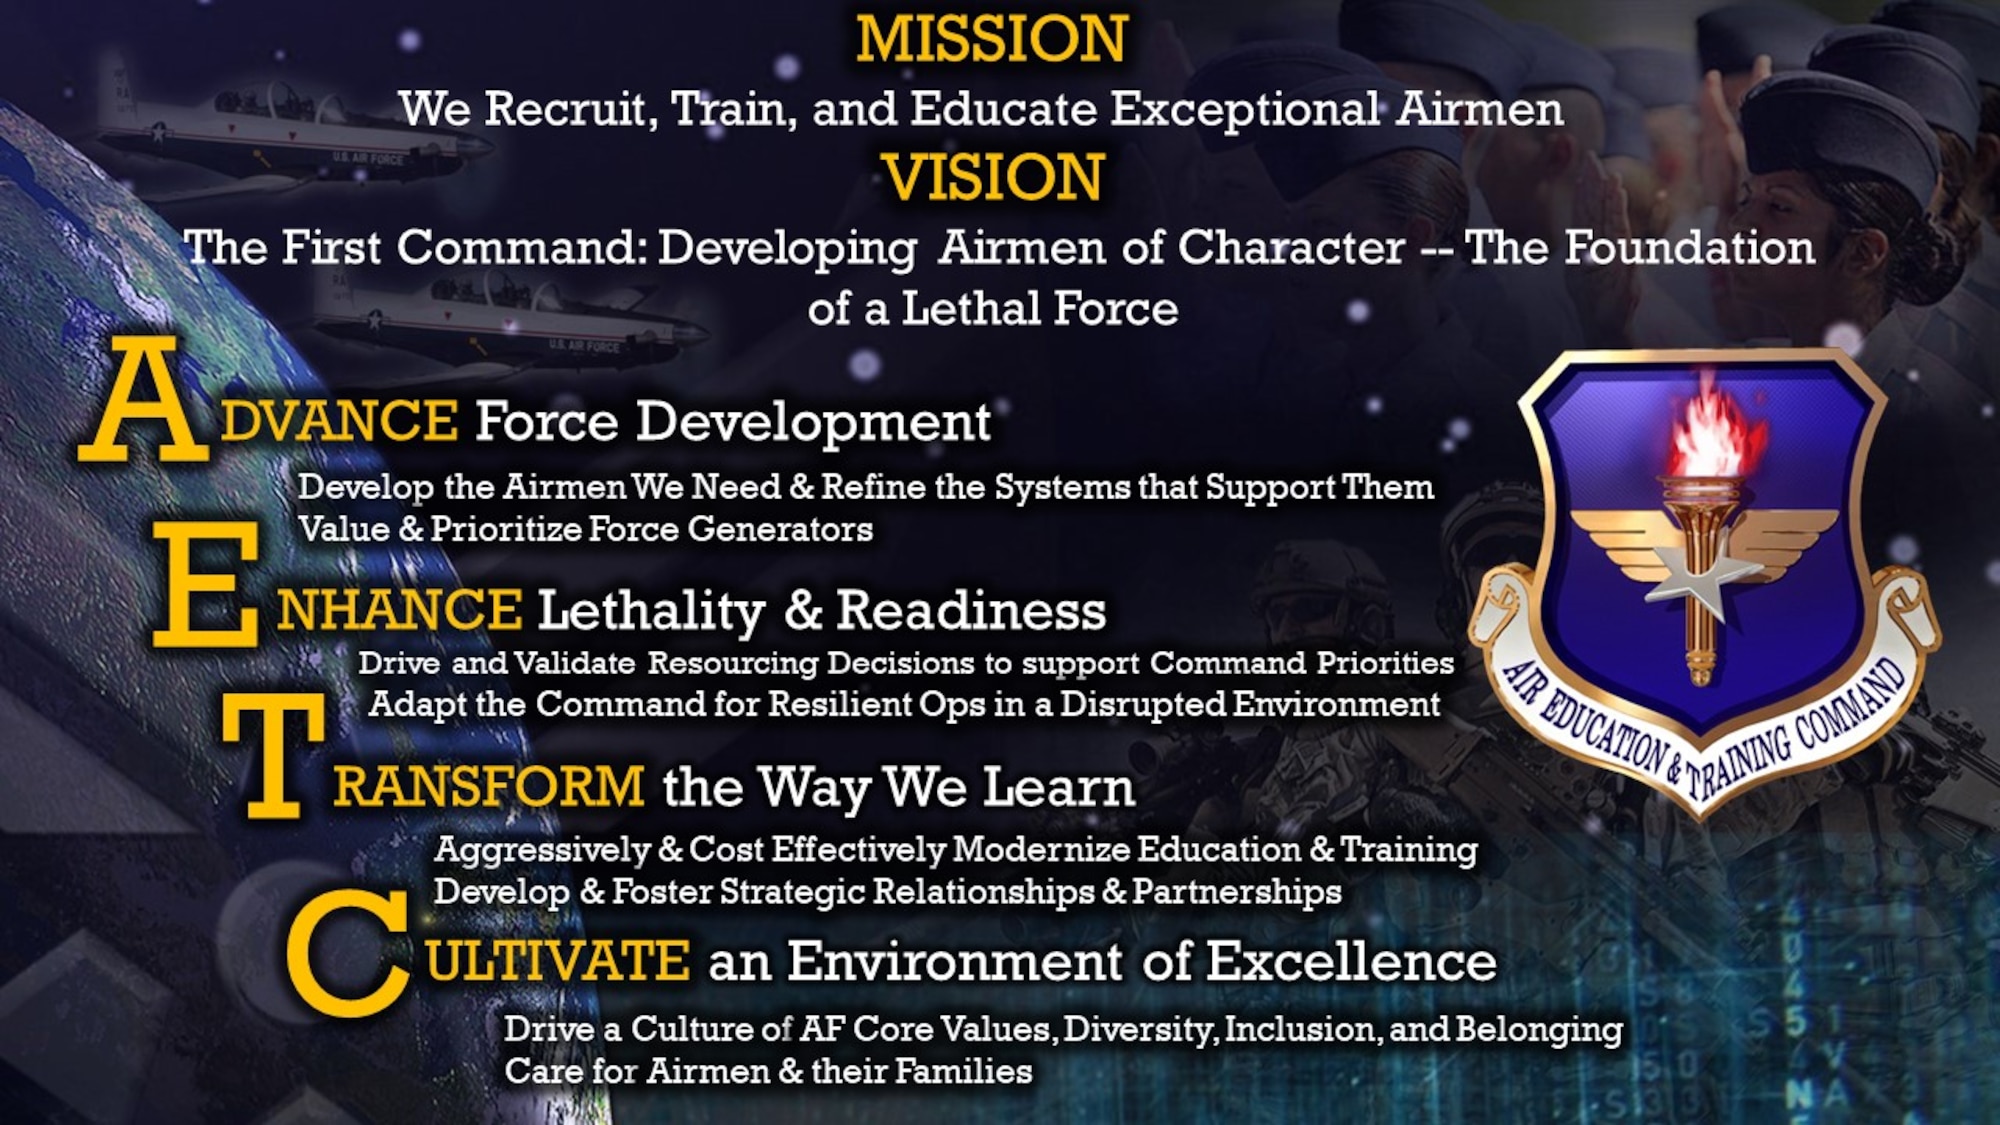 Air Education and Training Command mission, vision and priorities as of Nov. 3, 2020.